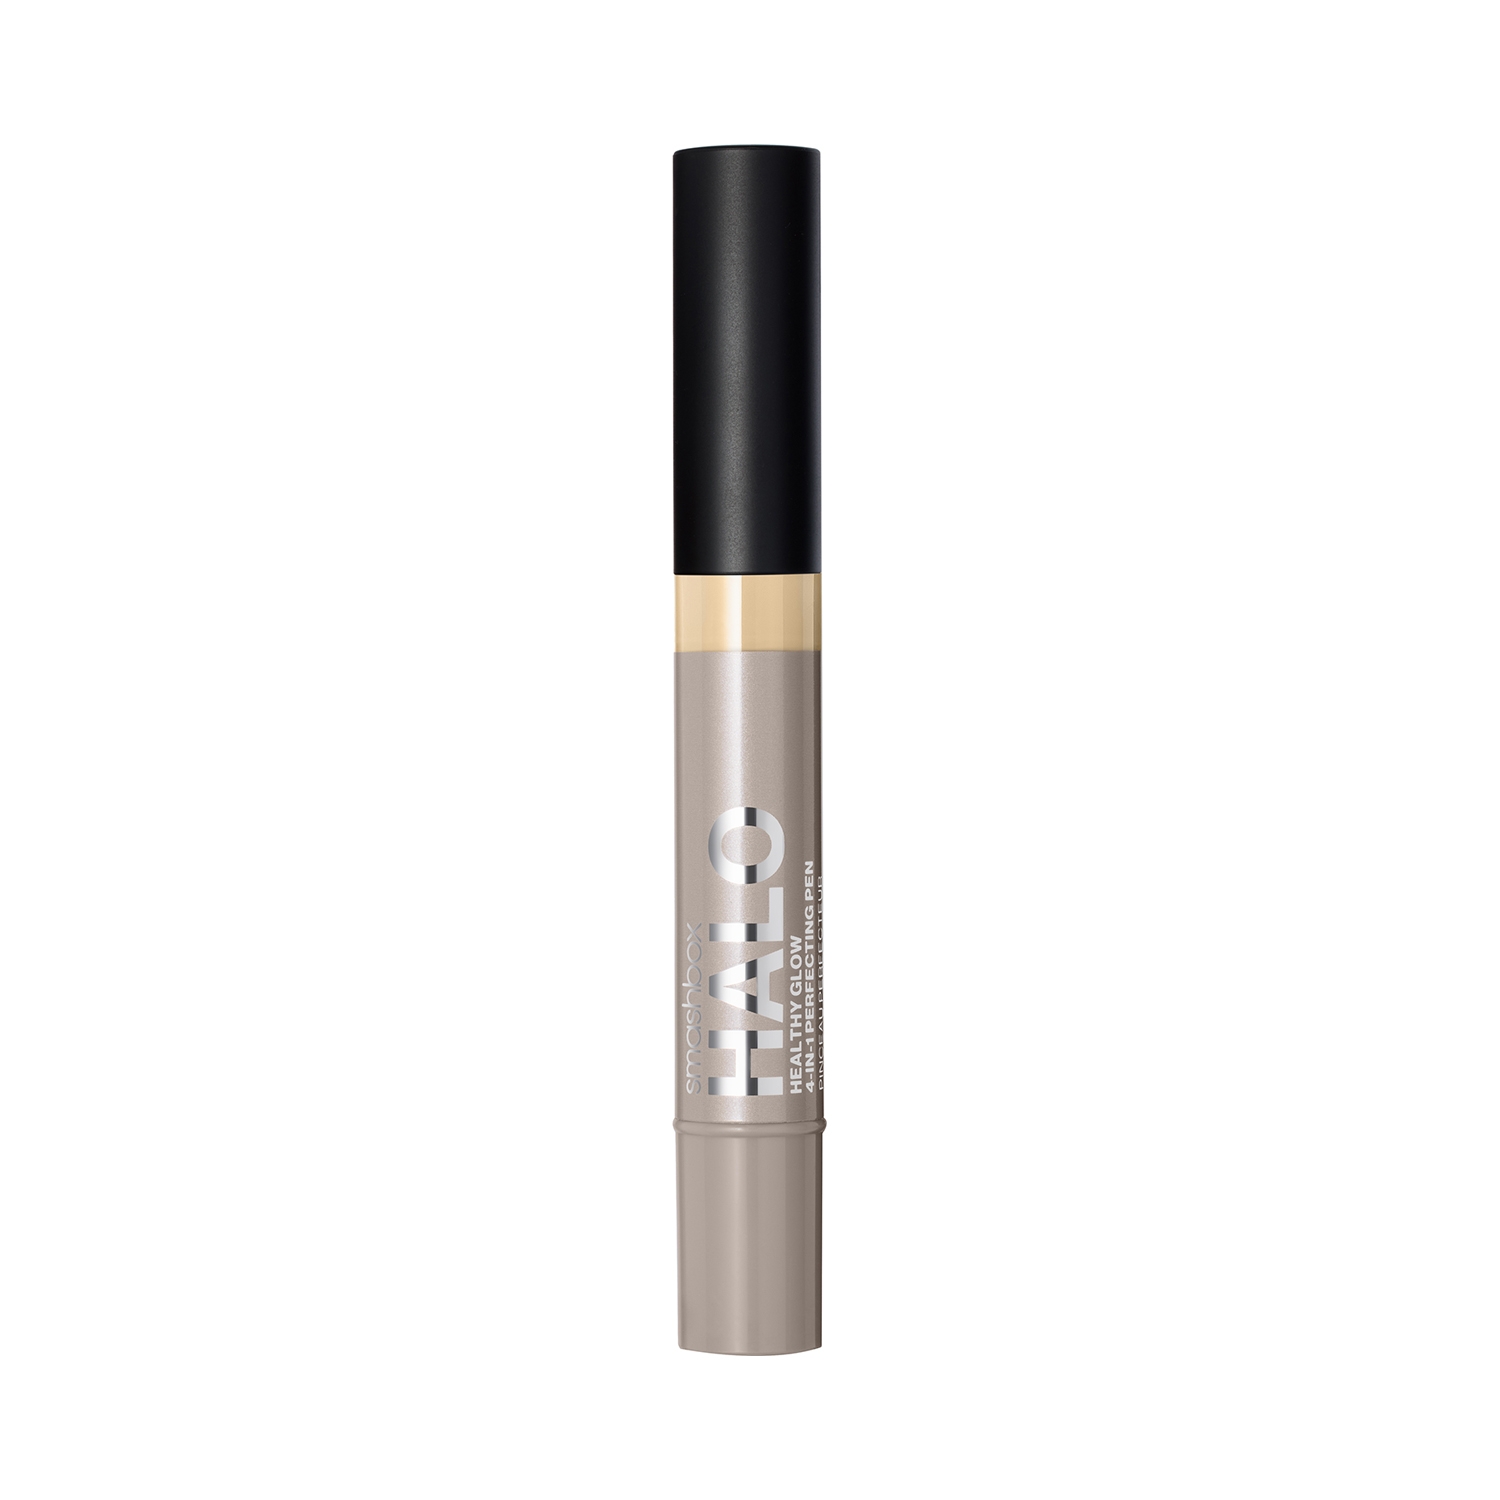 Smashbox | Smashbox Halo Healthy Glow 4-In-1 Perfecting Concealer Pen - F20W (3.5ml)